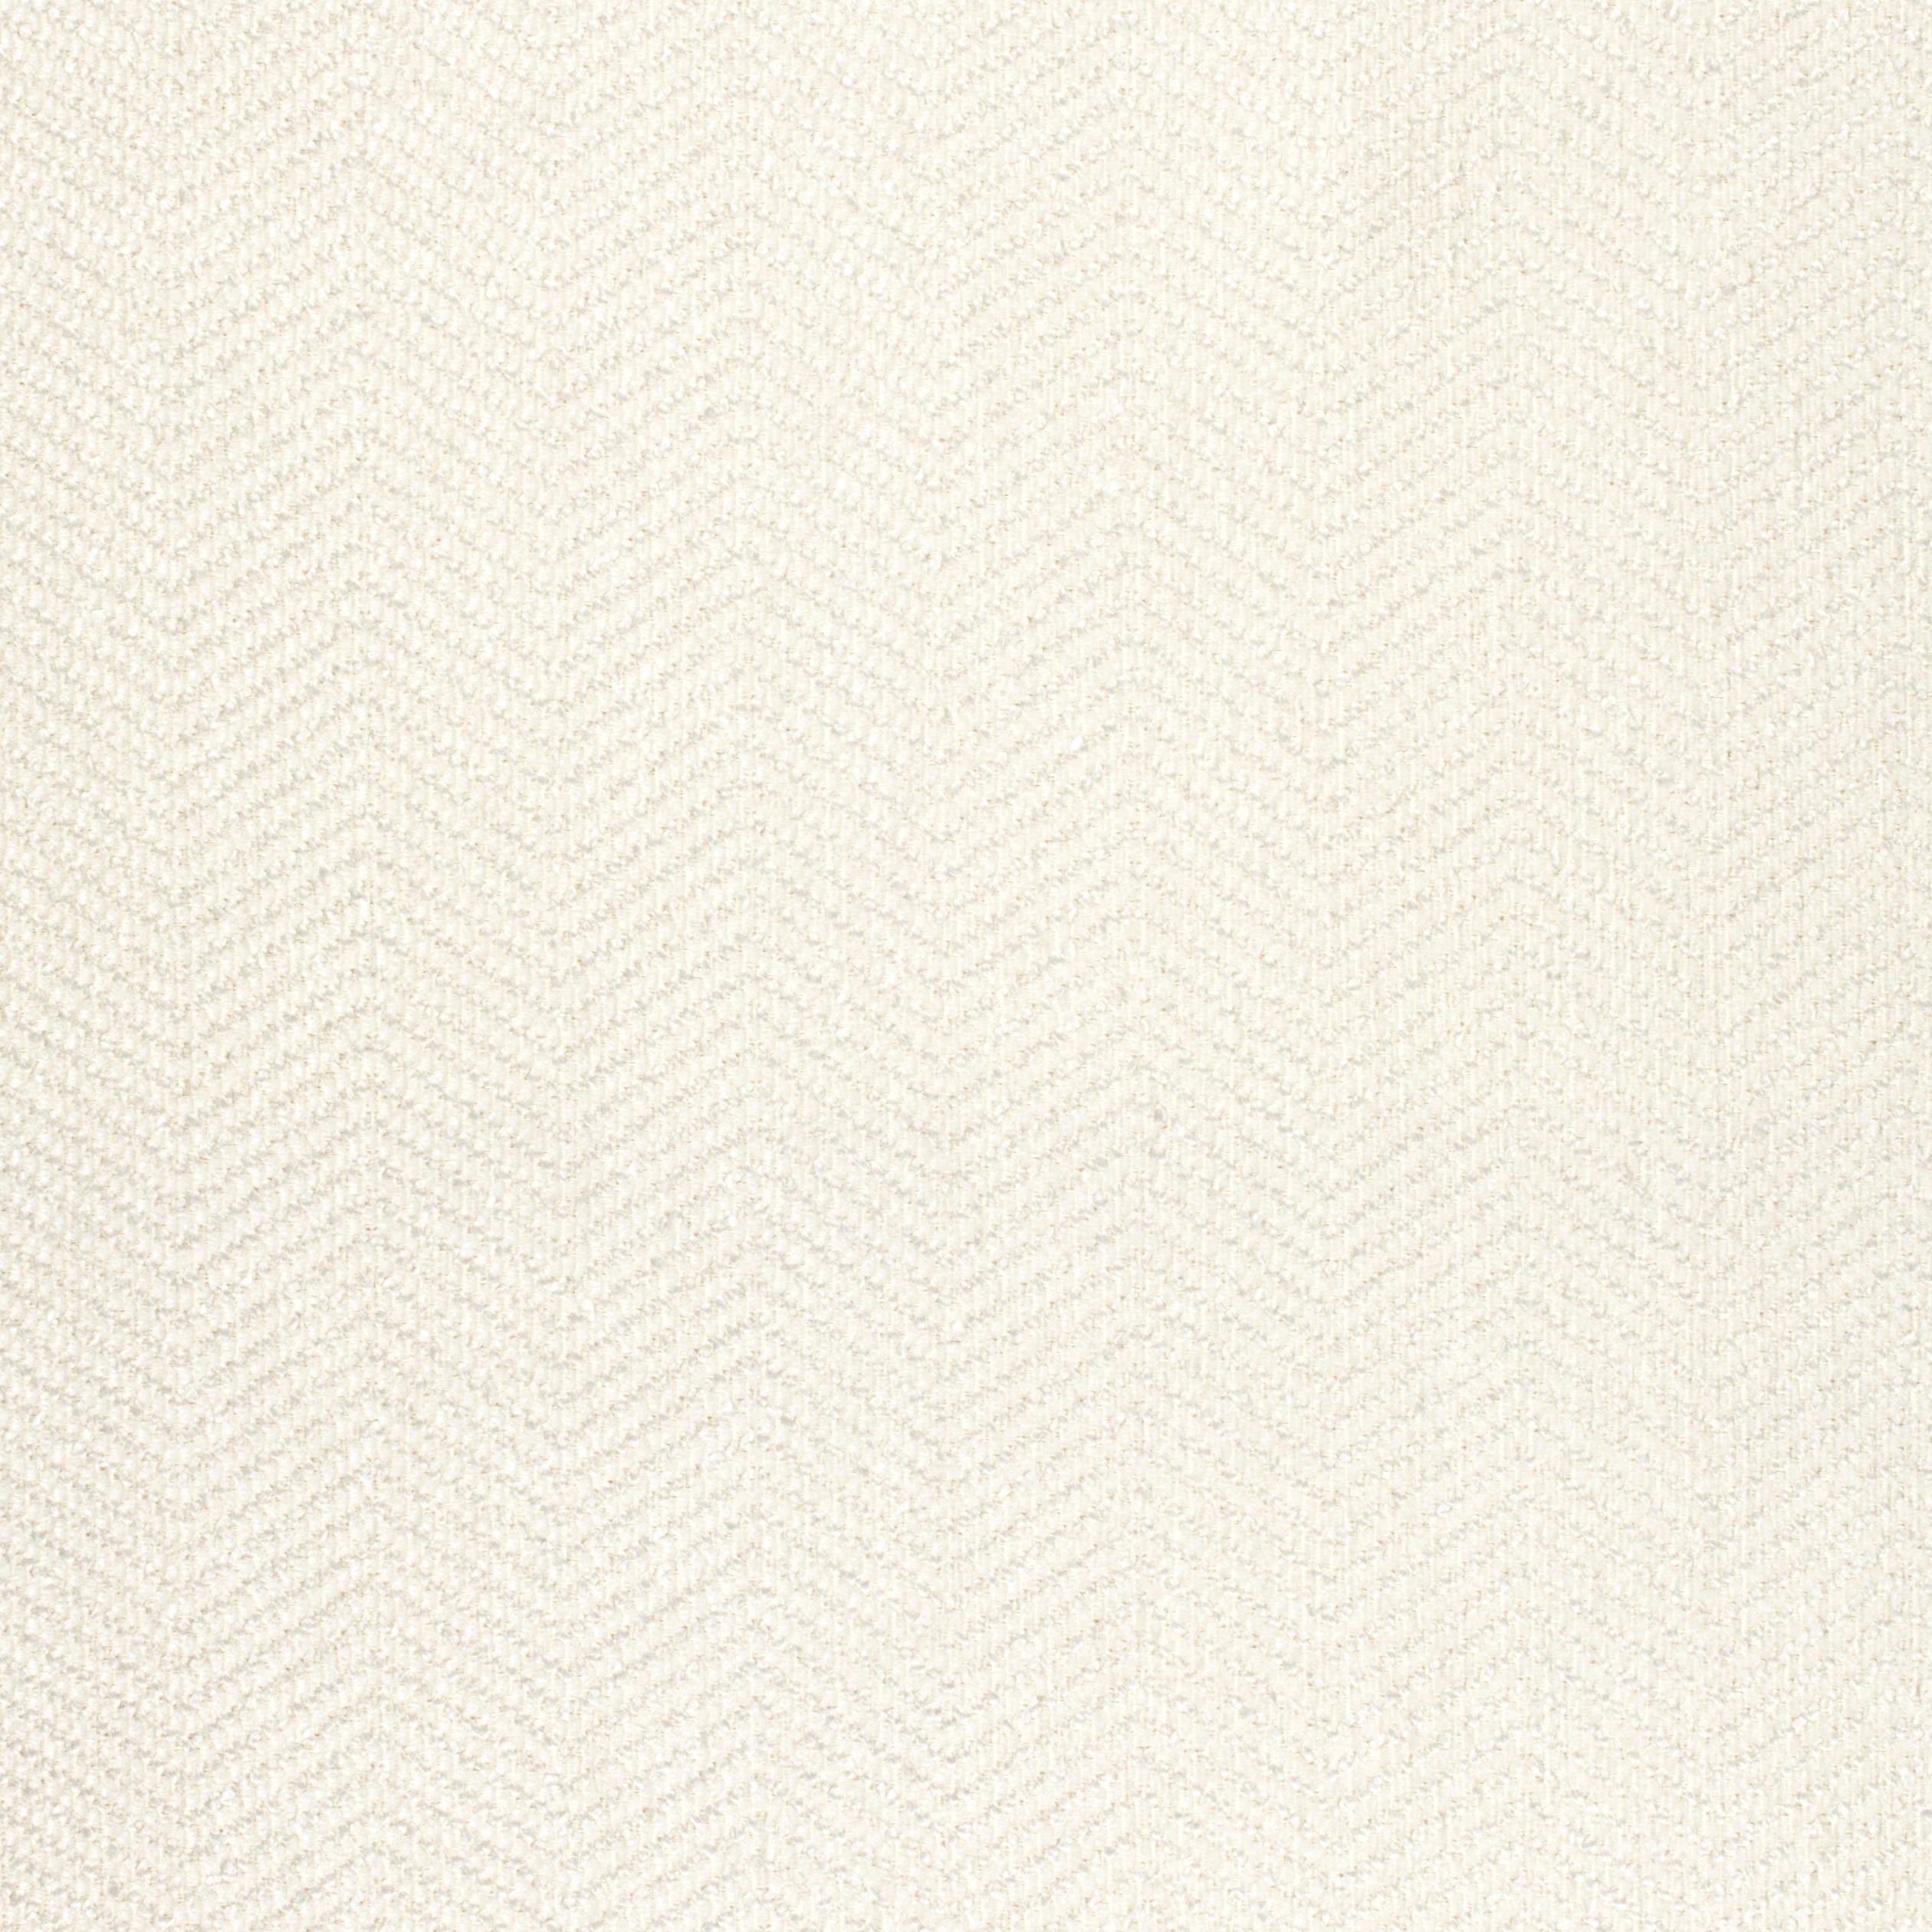 Dalton Herringbone fabric in ivory color - pattern number W80621 - by Thibaut in the Pinnacle collection